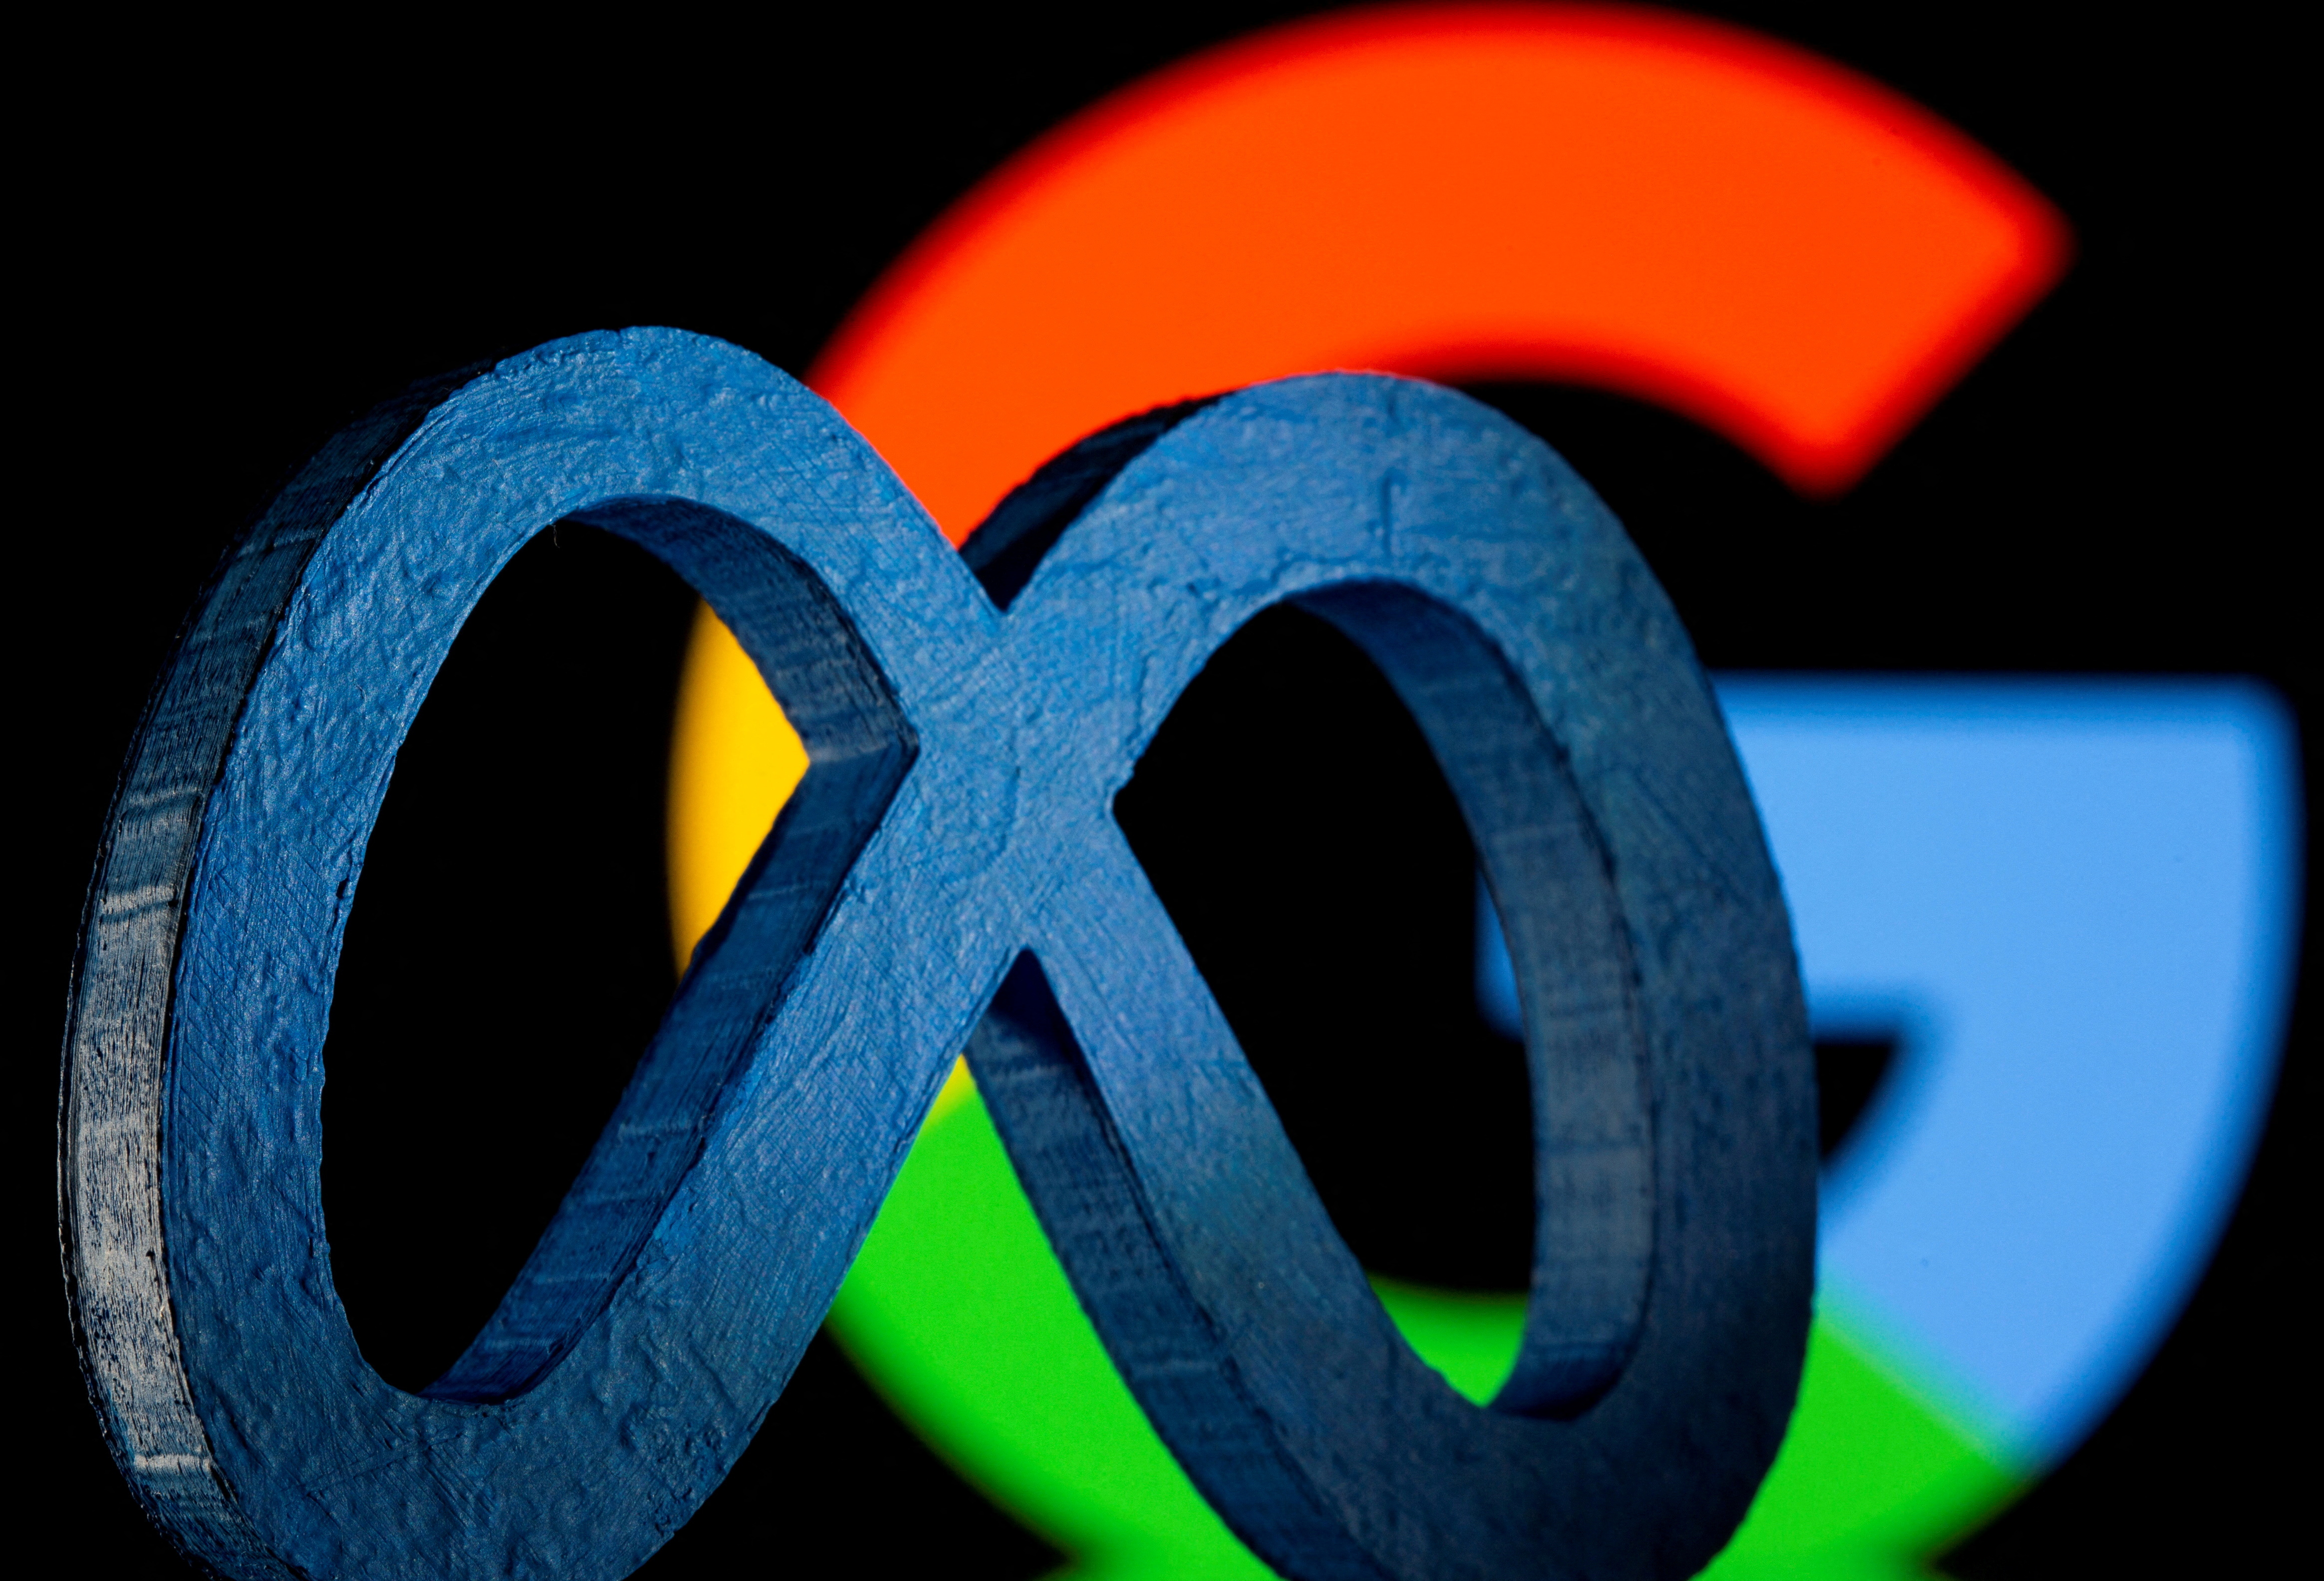 A 3D printed logo of Meta Platforms is seen in front of displayed Google logo in this illustration